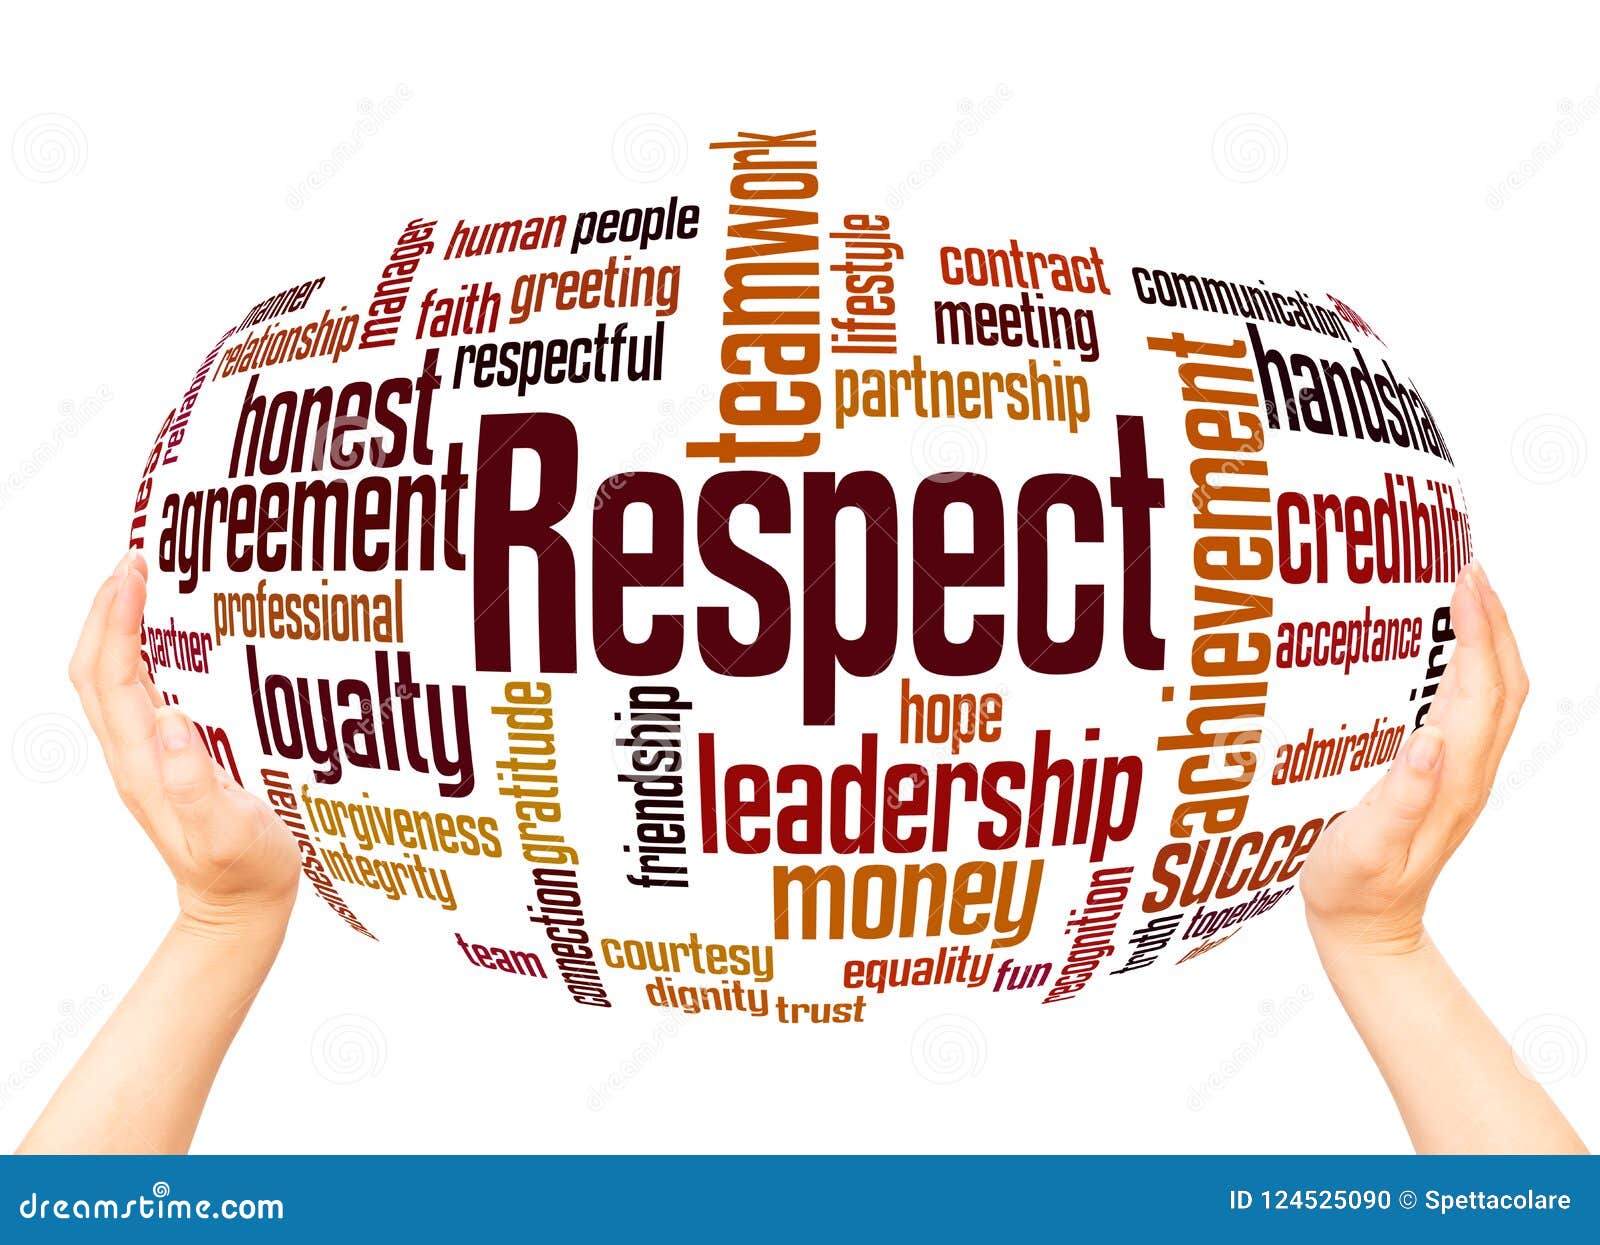 respect word cloud hand sphere concept